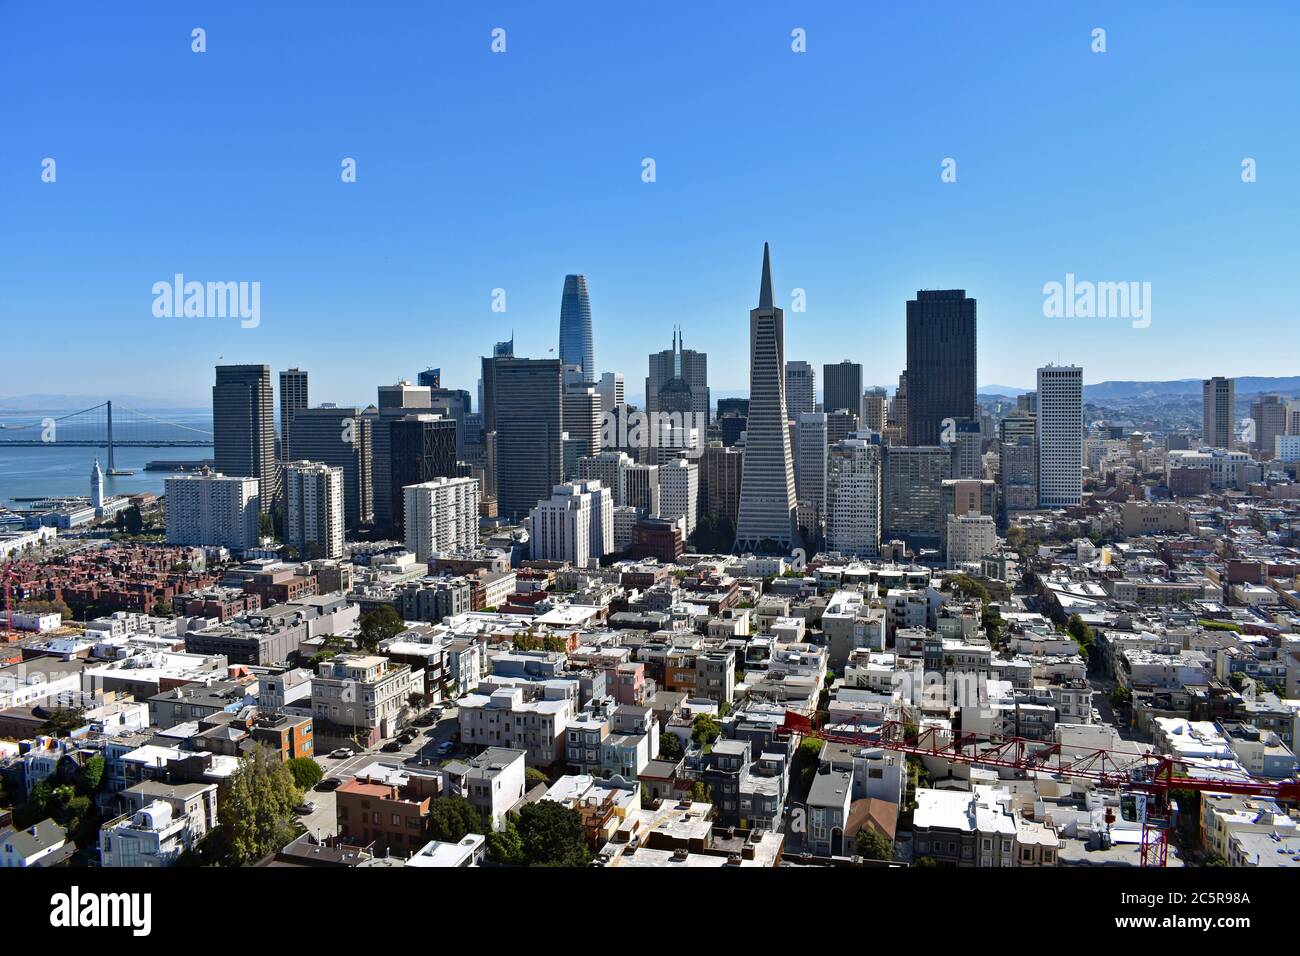 Downtown San Francisco, Bay Bridge, Transamerica Pyramid and streets from the top of Coit Tower on Telegraph Hill.  San Francisco, California. Stock Photo